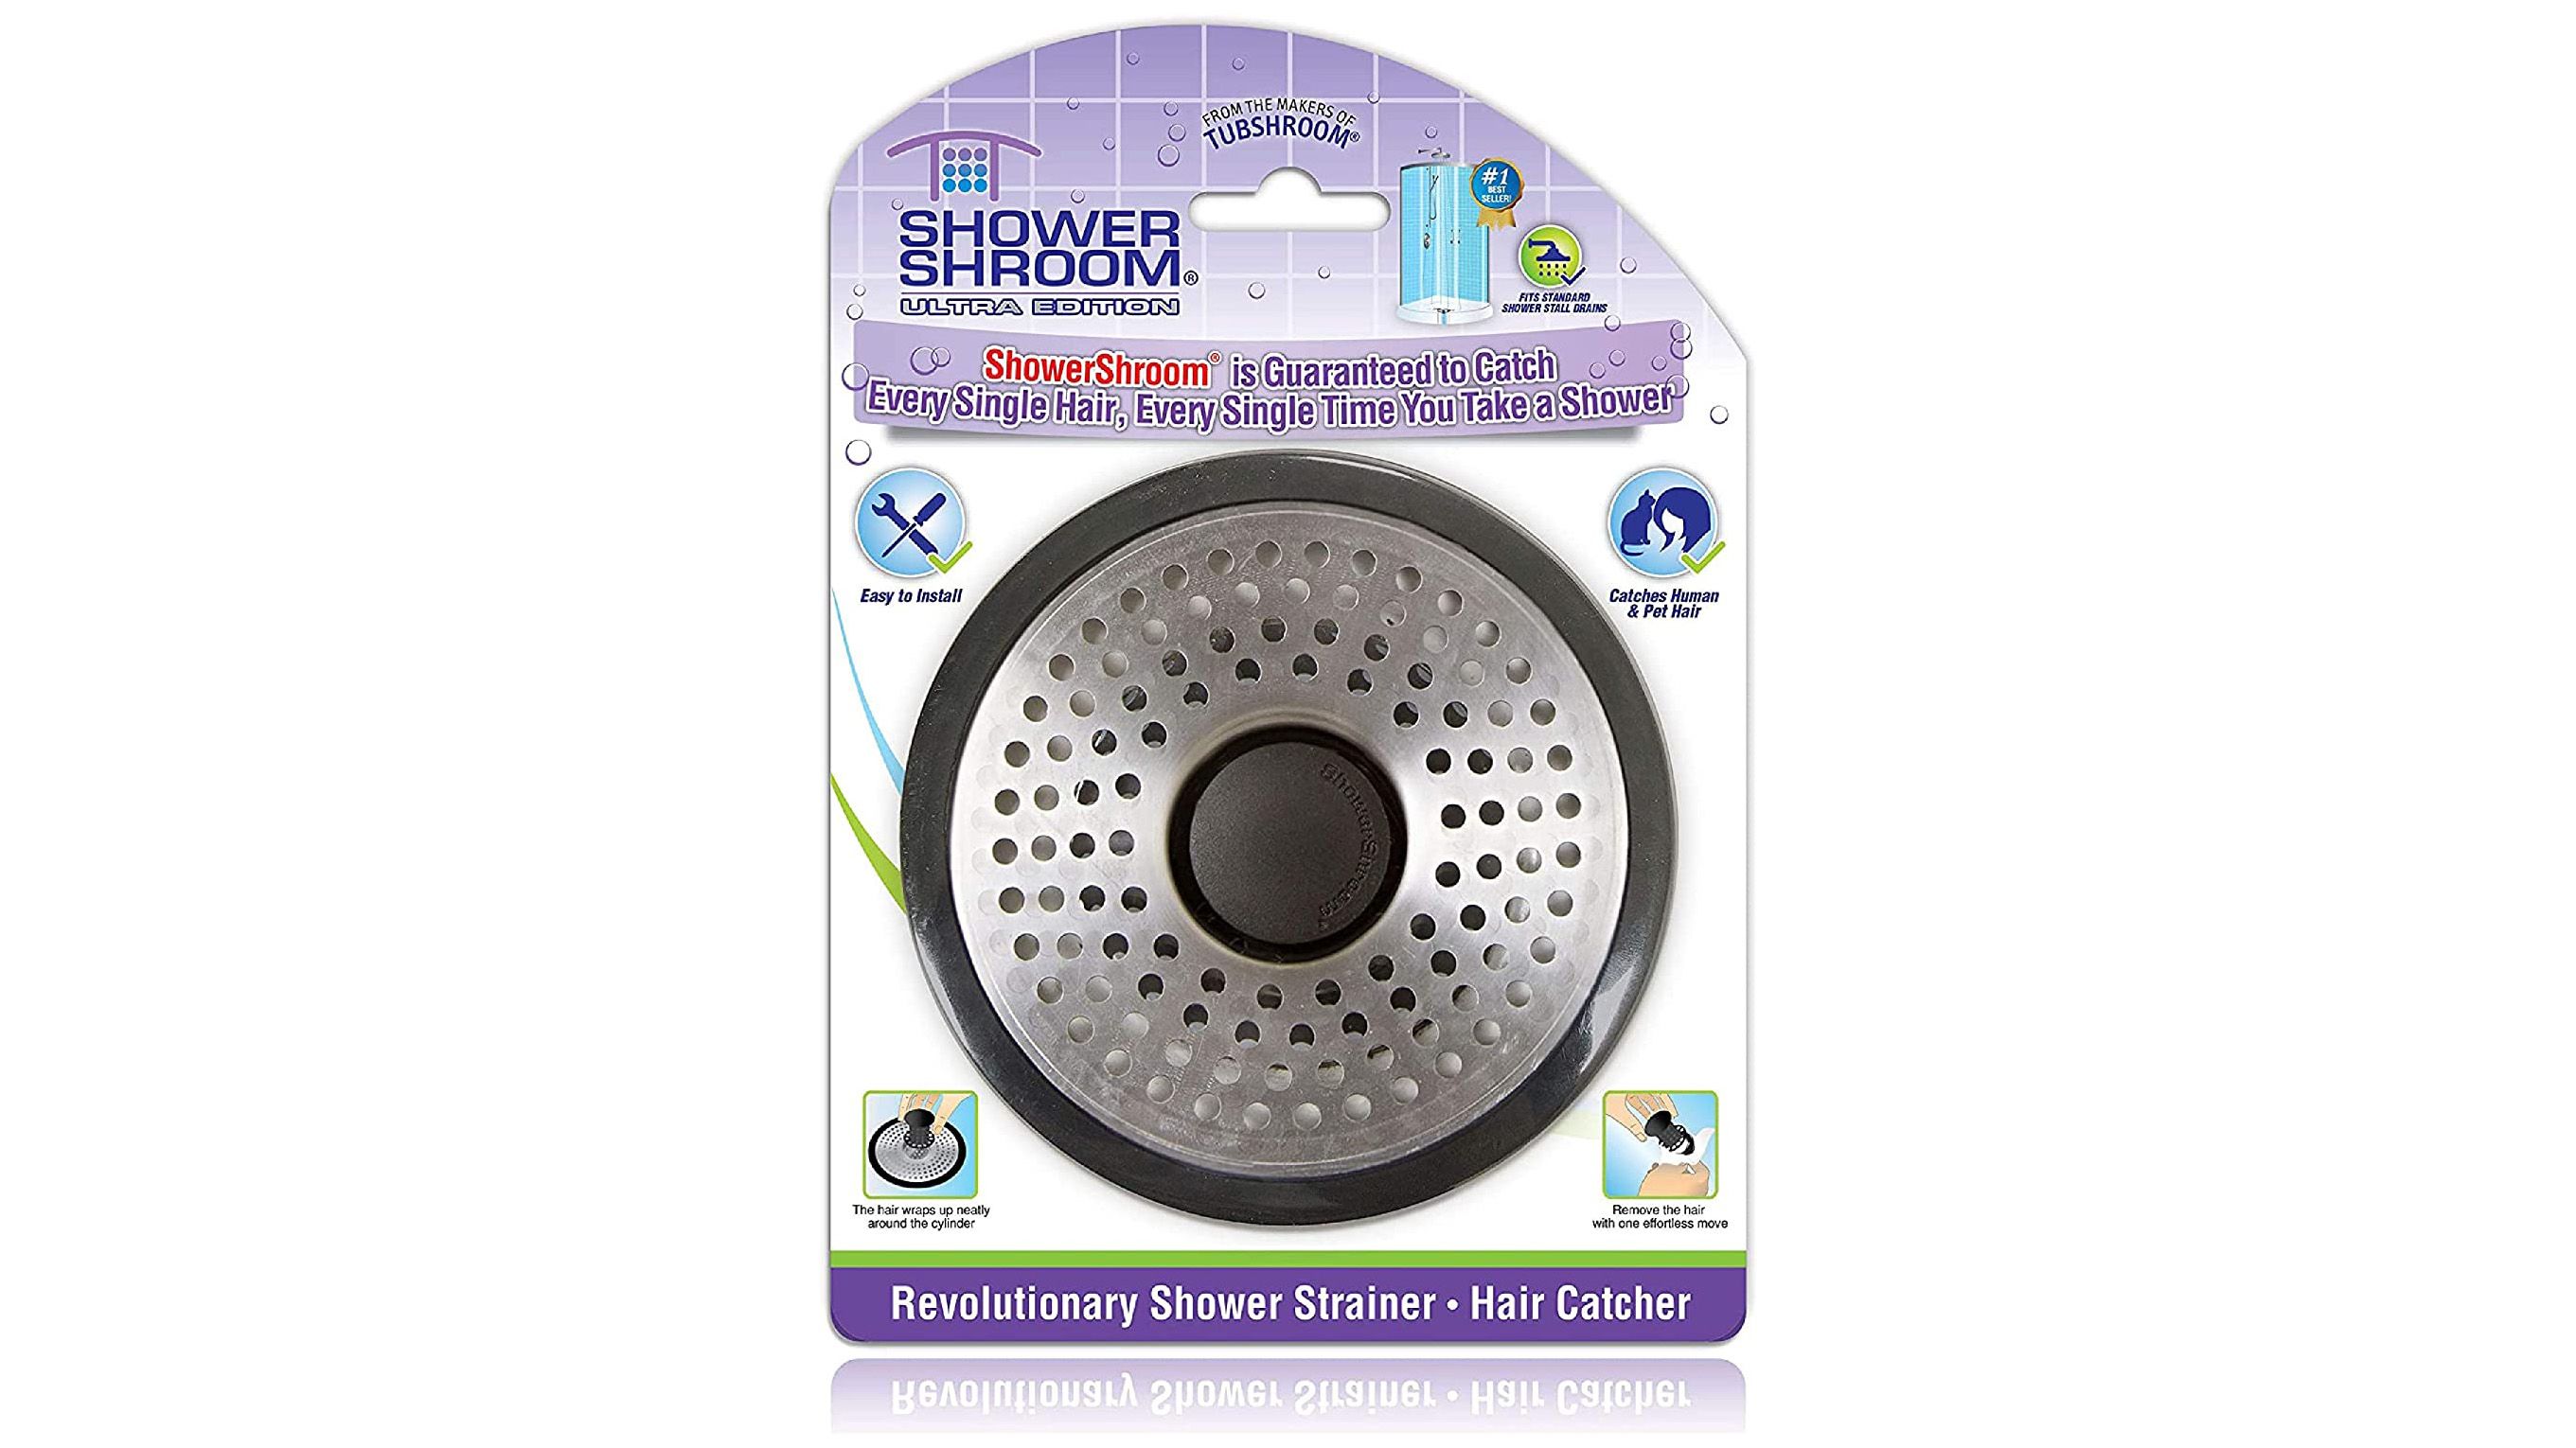 TubShroom Drain Hair Catcher Review - Best Products to Unclog